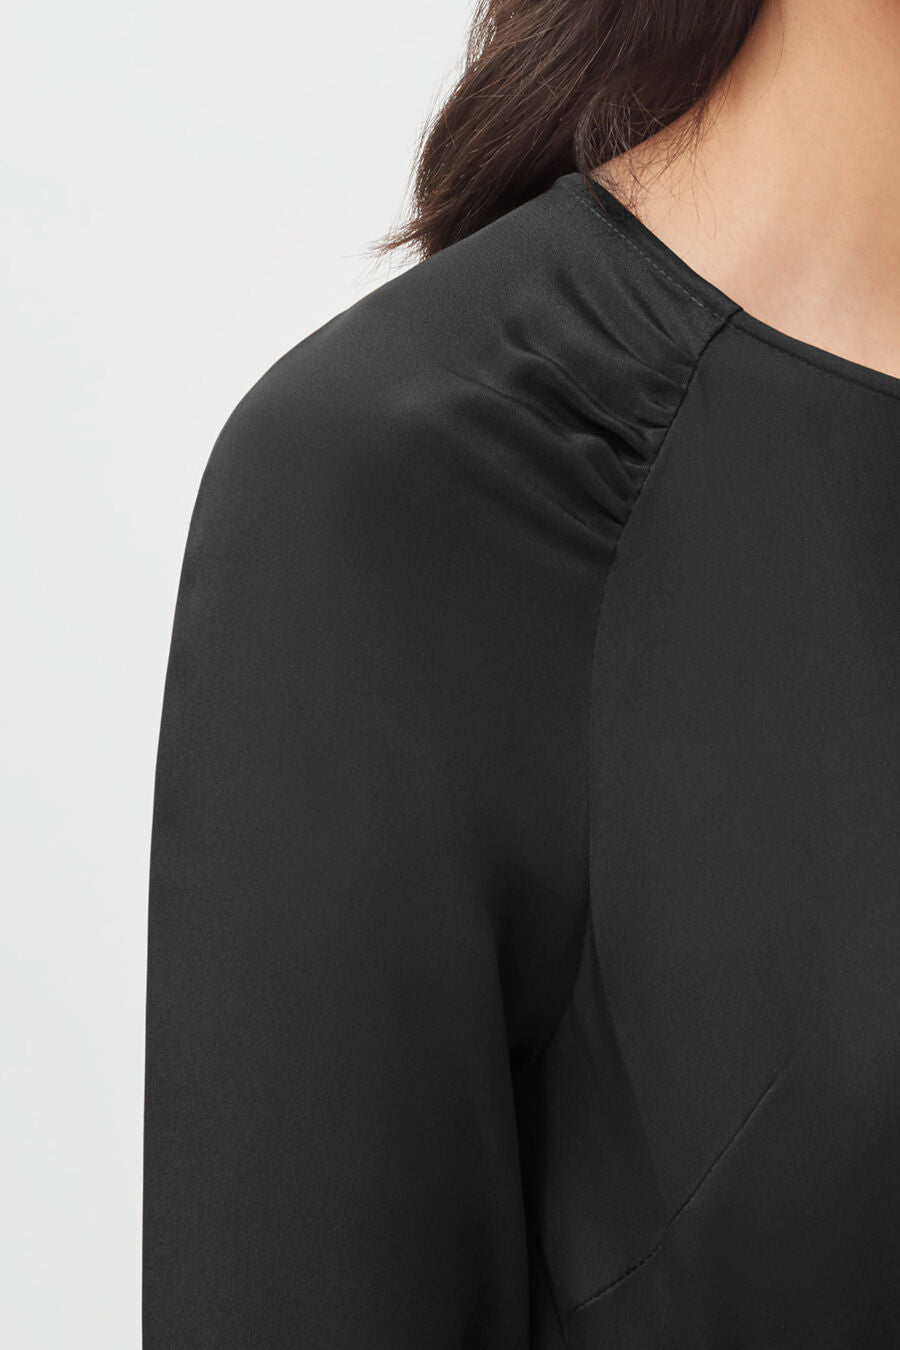 Close-up of a person wearing a top with a gathered shoulder detail.